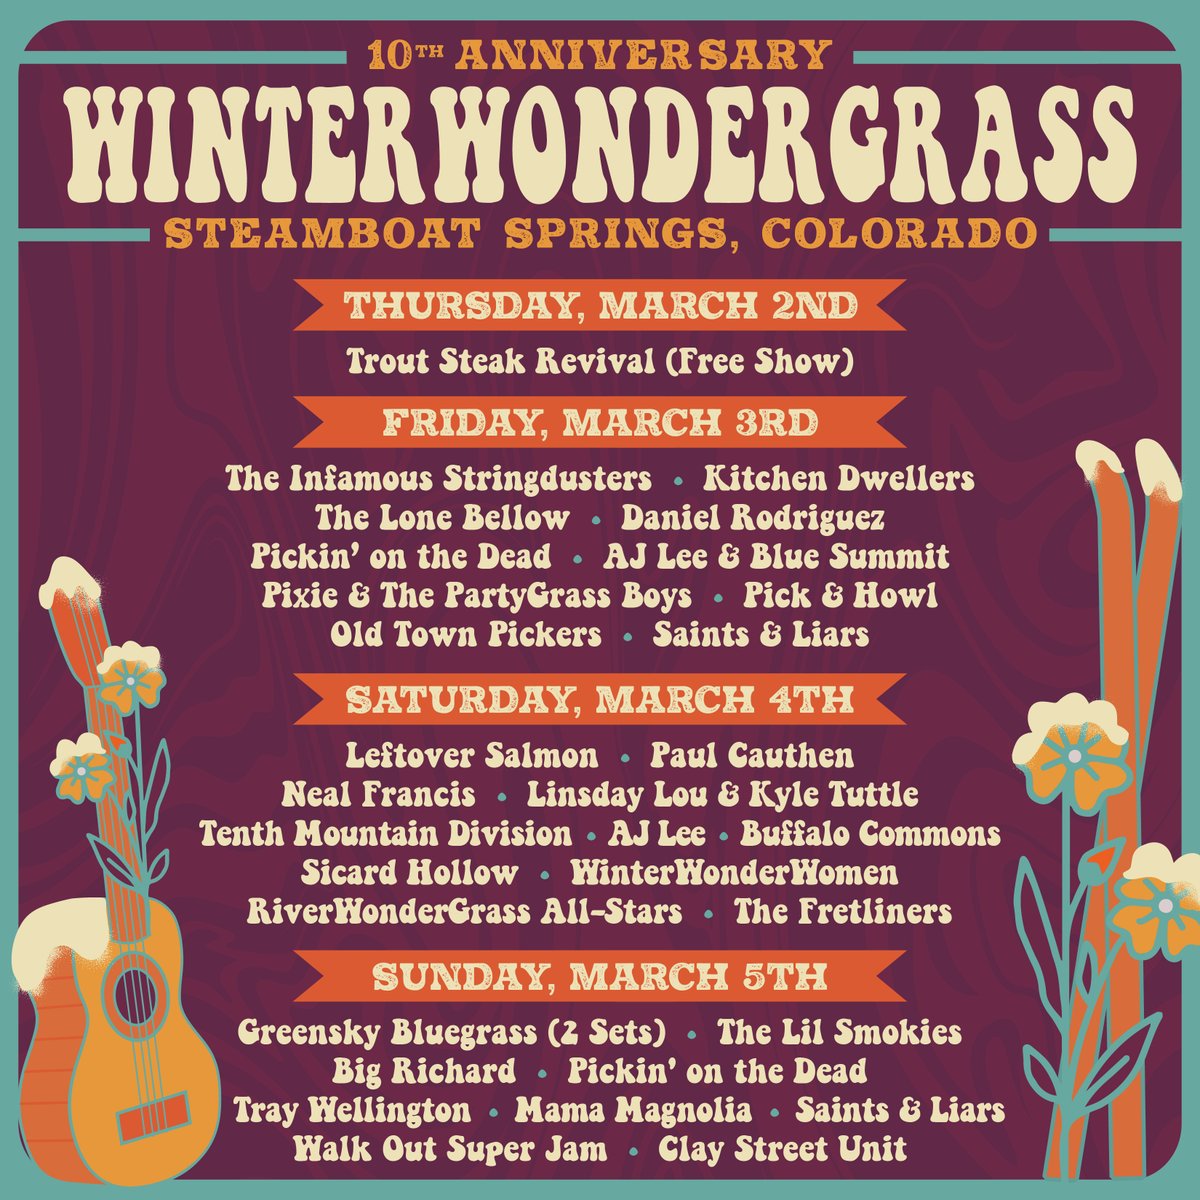 .@WWGfestival will celebrate ten years of music on the mountain when it returns to Steamboat Springs, CO this coming March! The flagship WWG festival will return to Steamboat Ski Resort with @campgreensky, @stringdusters, @LeftoverSalmon, and more. 🎫: winterwondergrass.com/steamboat